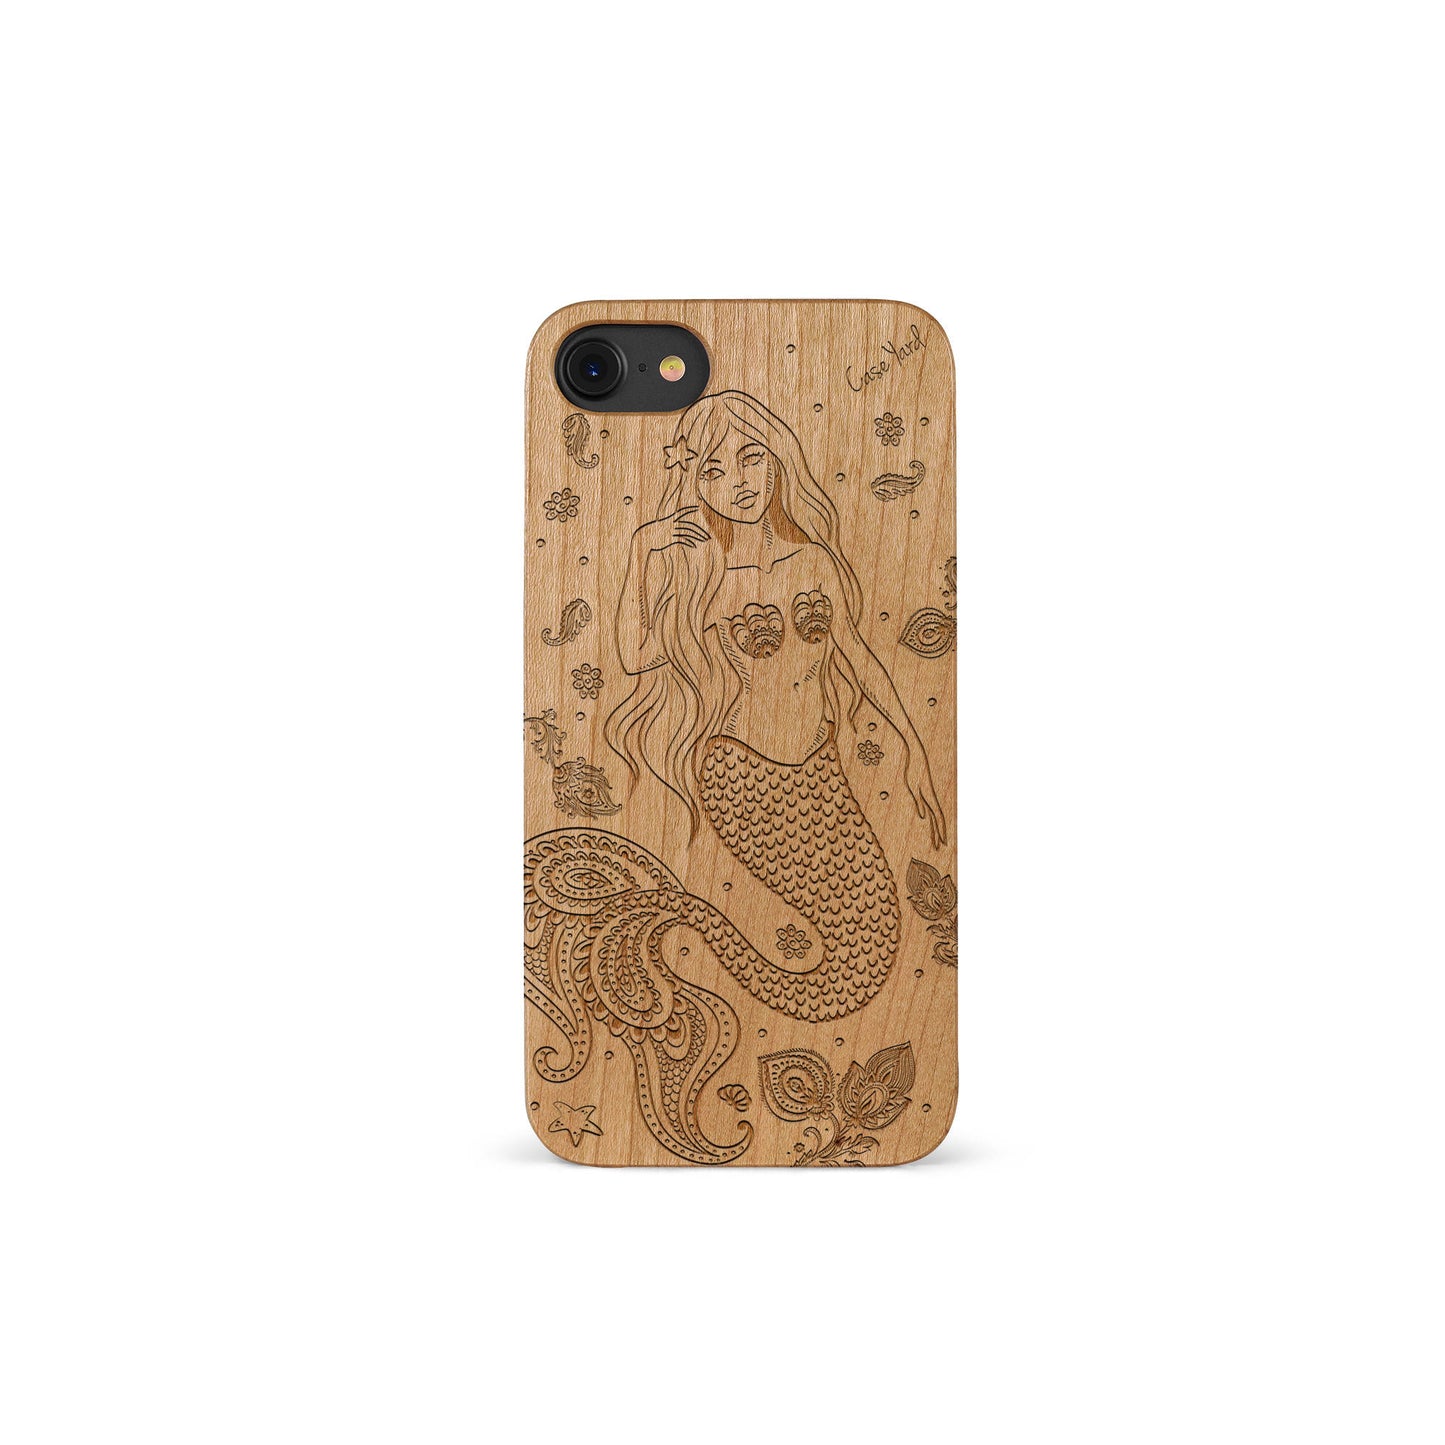 Wooden Cell Phone Case Cover, Laser Engraved case for iPhone & Samsung phone Mermaid Design